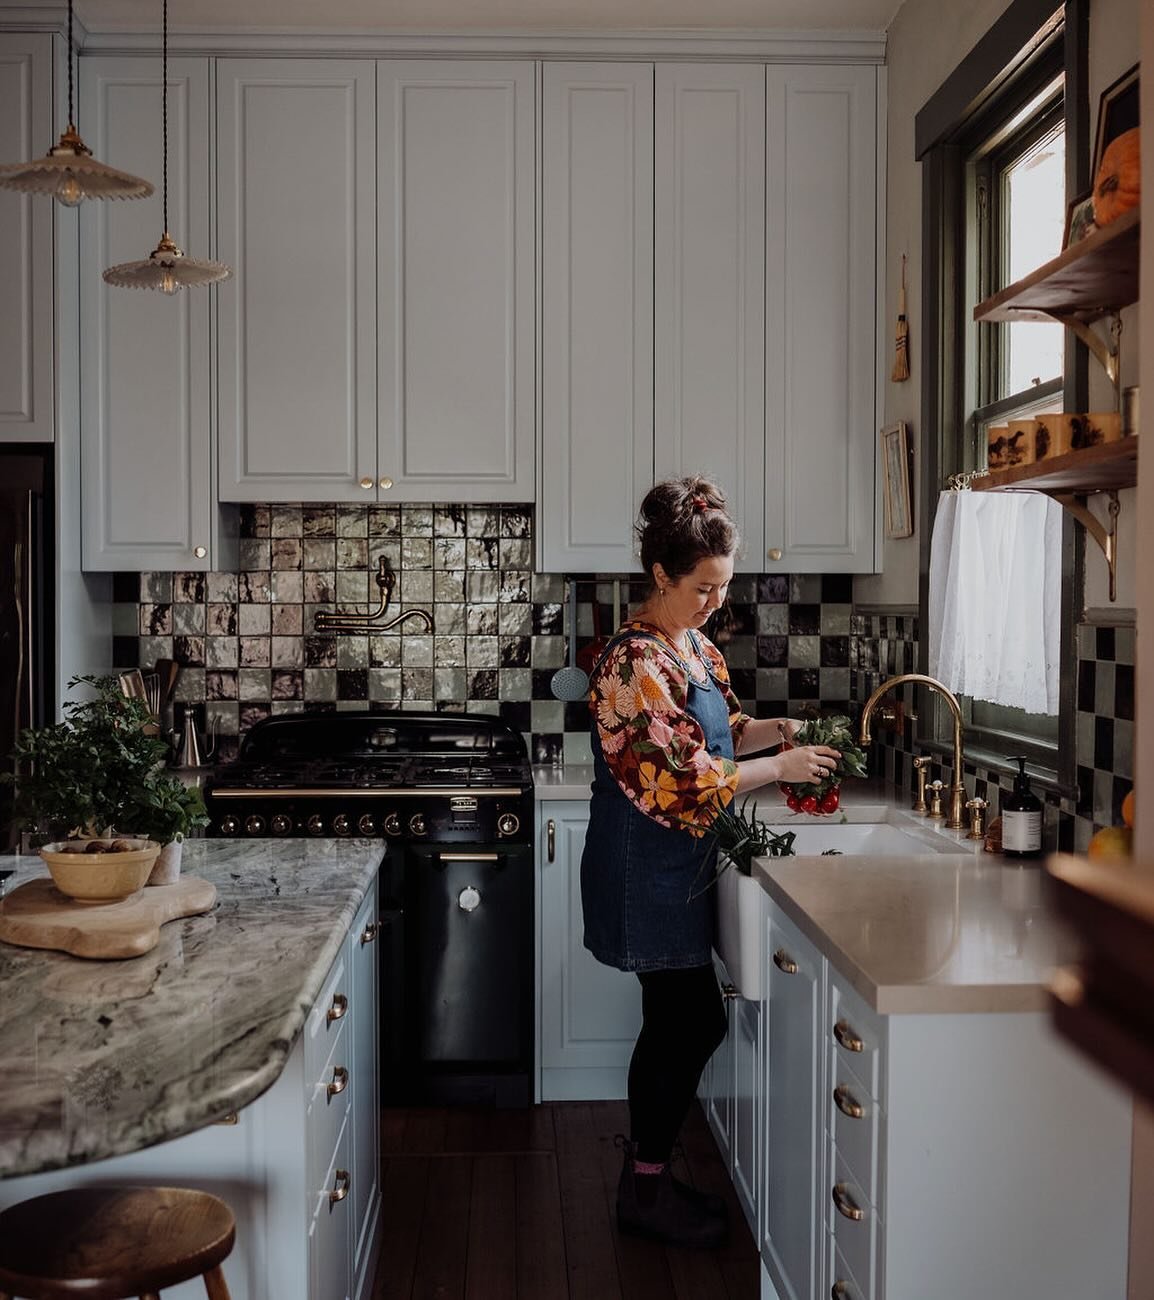 The heart of my home. It was such a joy to design this space from scratch and create the kitchen of my dreams. 📷 @love_annacritchley